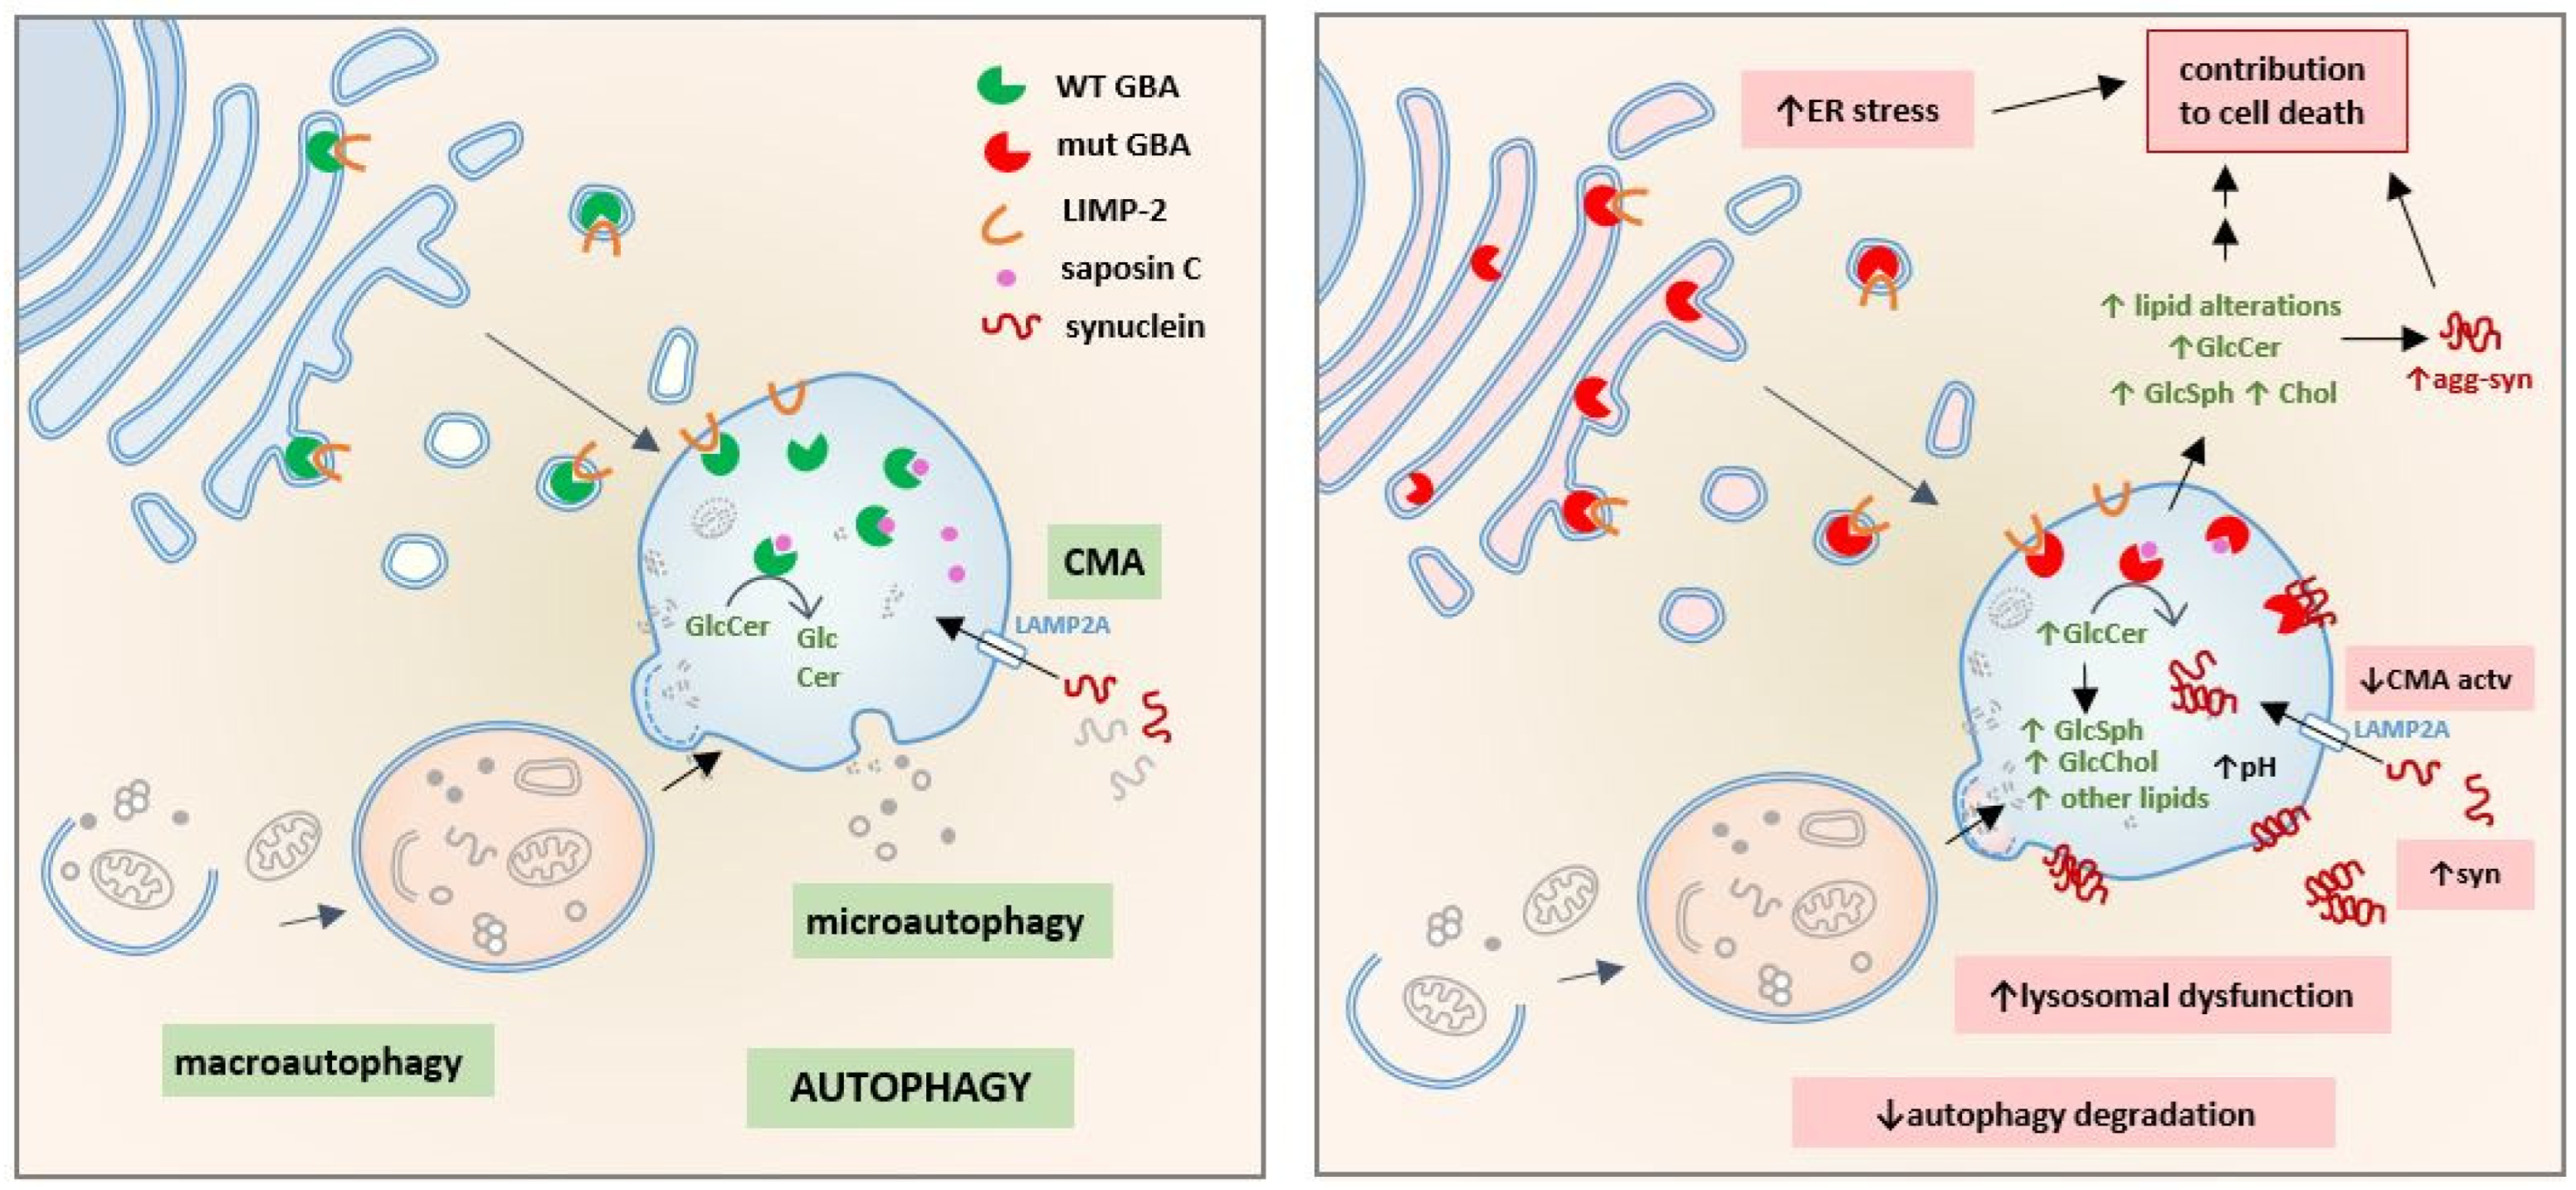 Cells Free Full-Text The Consequences of GBA Deficiency in the Autophagyandndash;Lysosome System in Parkinsonandrsquo;s Disease Associated with image